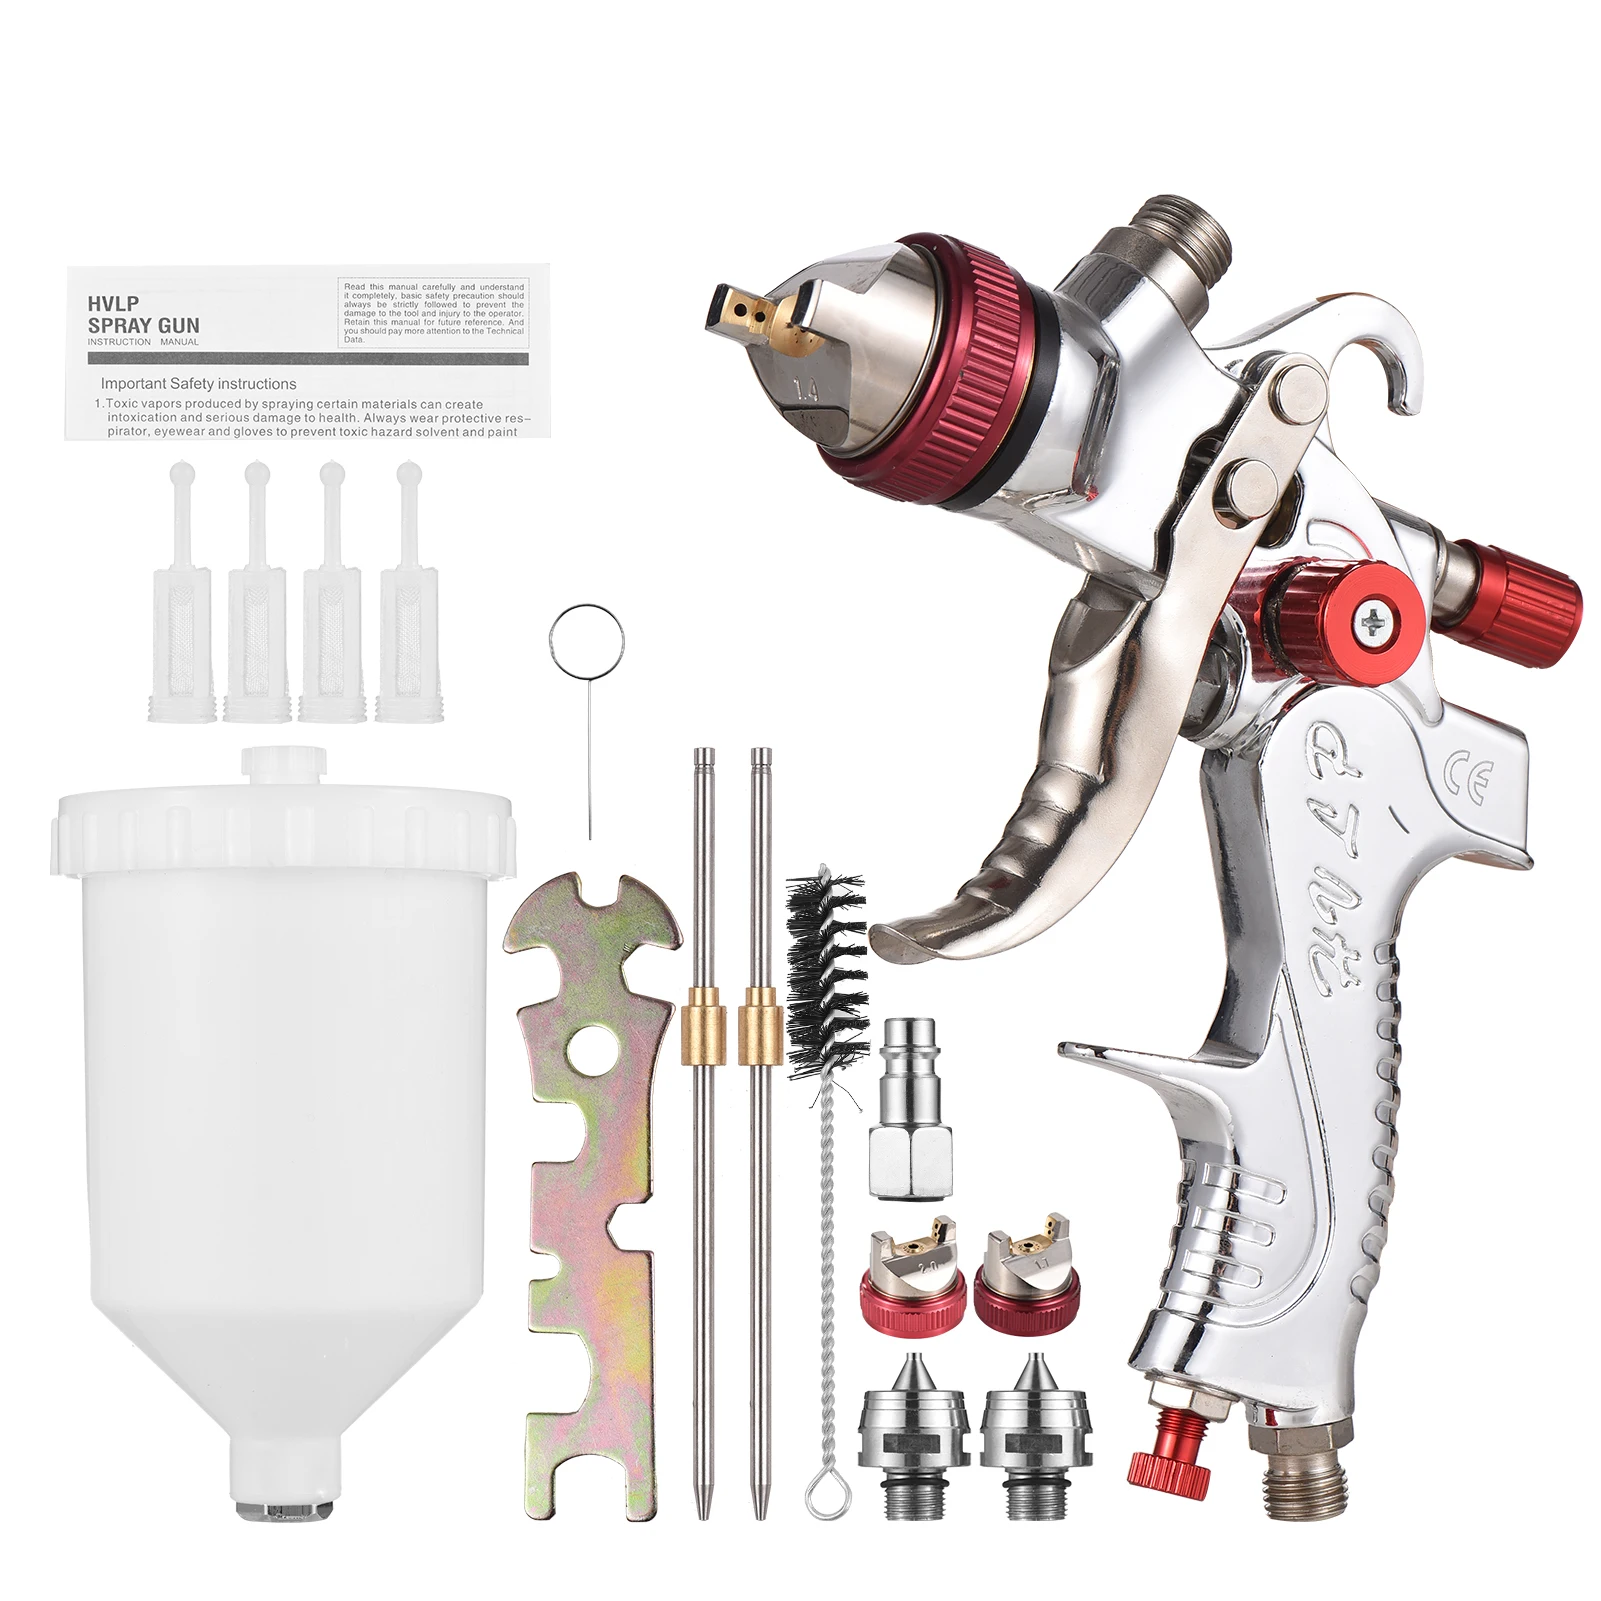 

HVLP Paint Spraying Gun Kit Gravity Feed Air Spray Gun with 600ml Cup 1.4/1.7/2.0mm Nozzles for Painting Car Furniture Wall